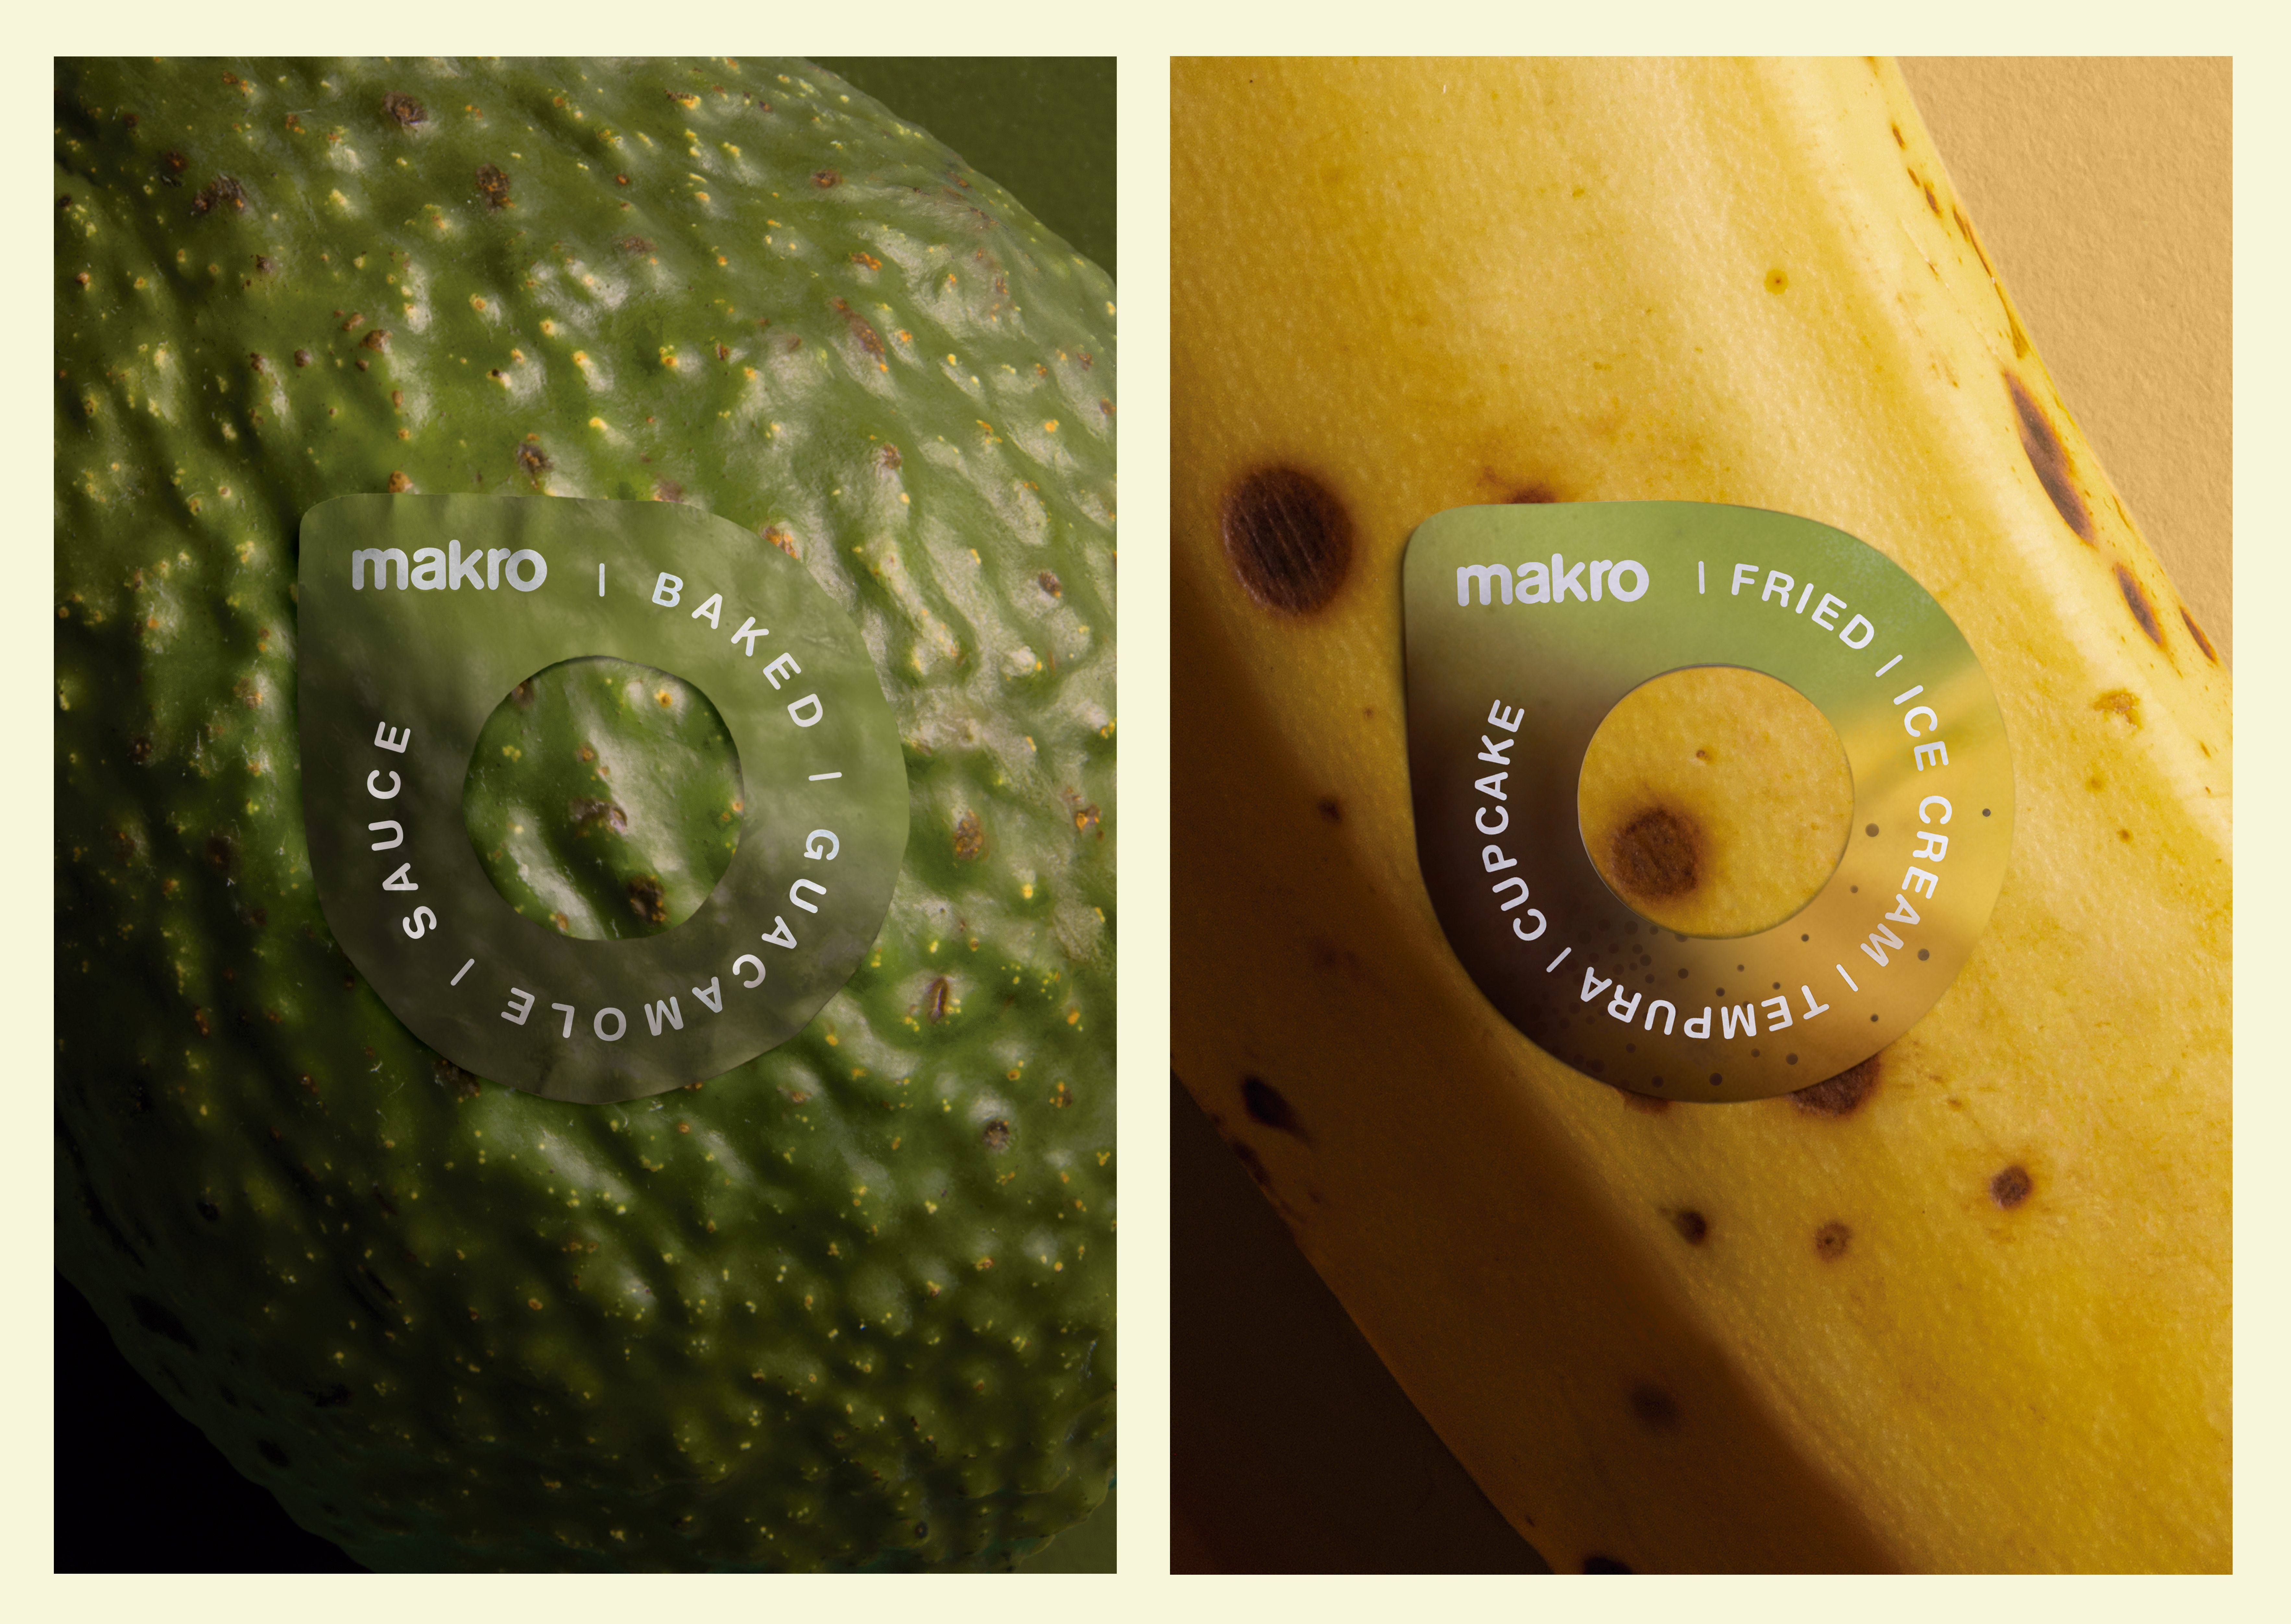 Tiny Stickers Combat Massive Food Waste Issues By Using Color As A Tool